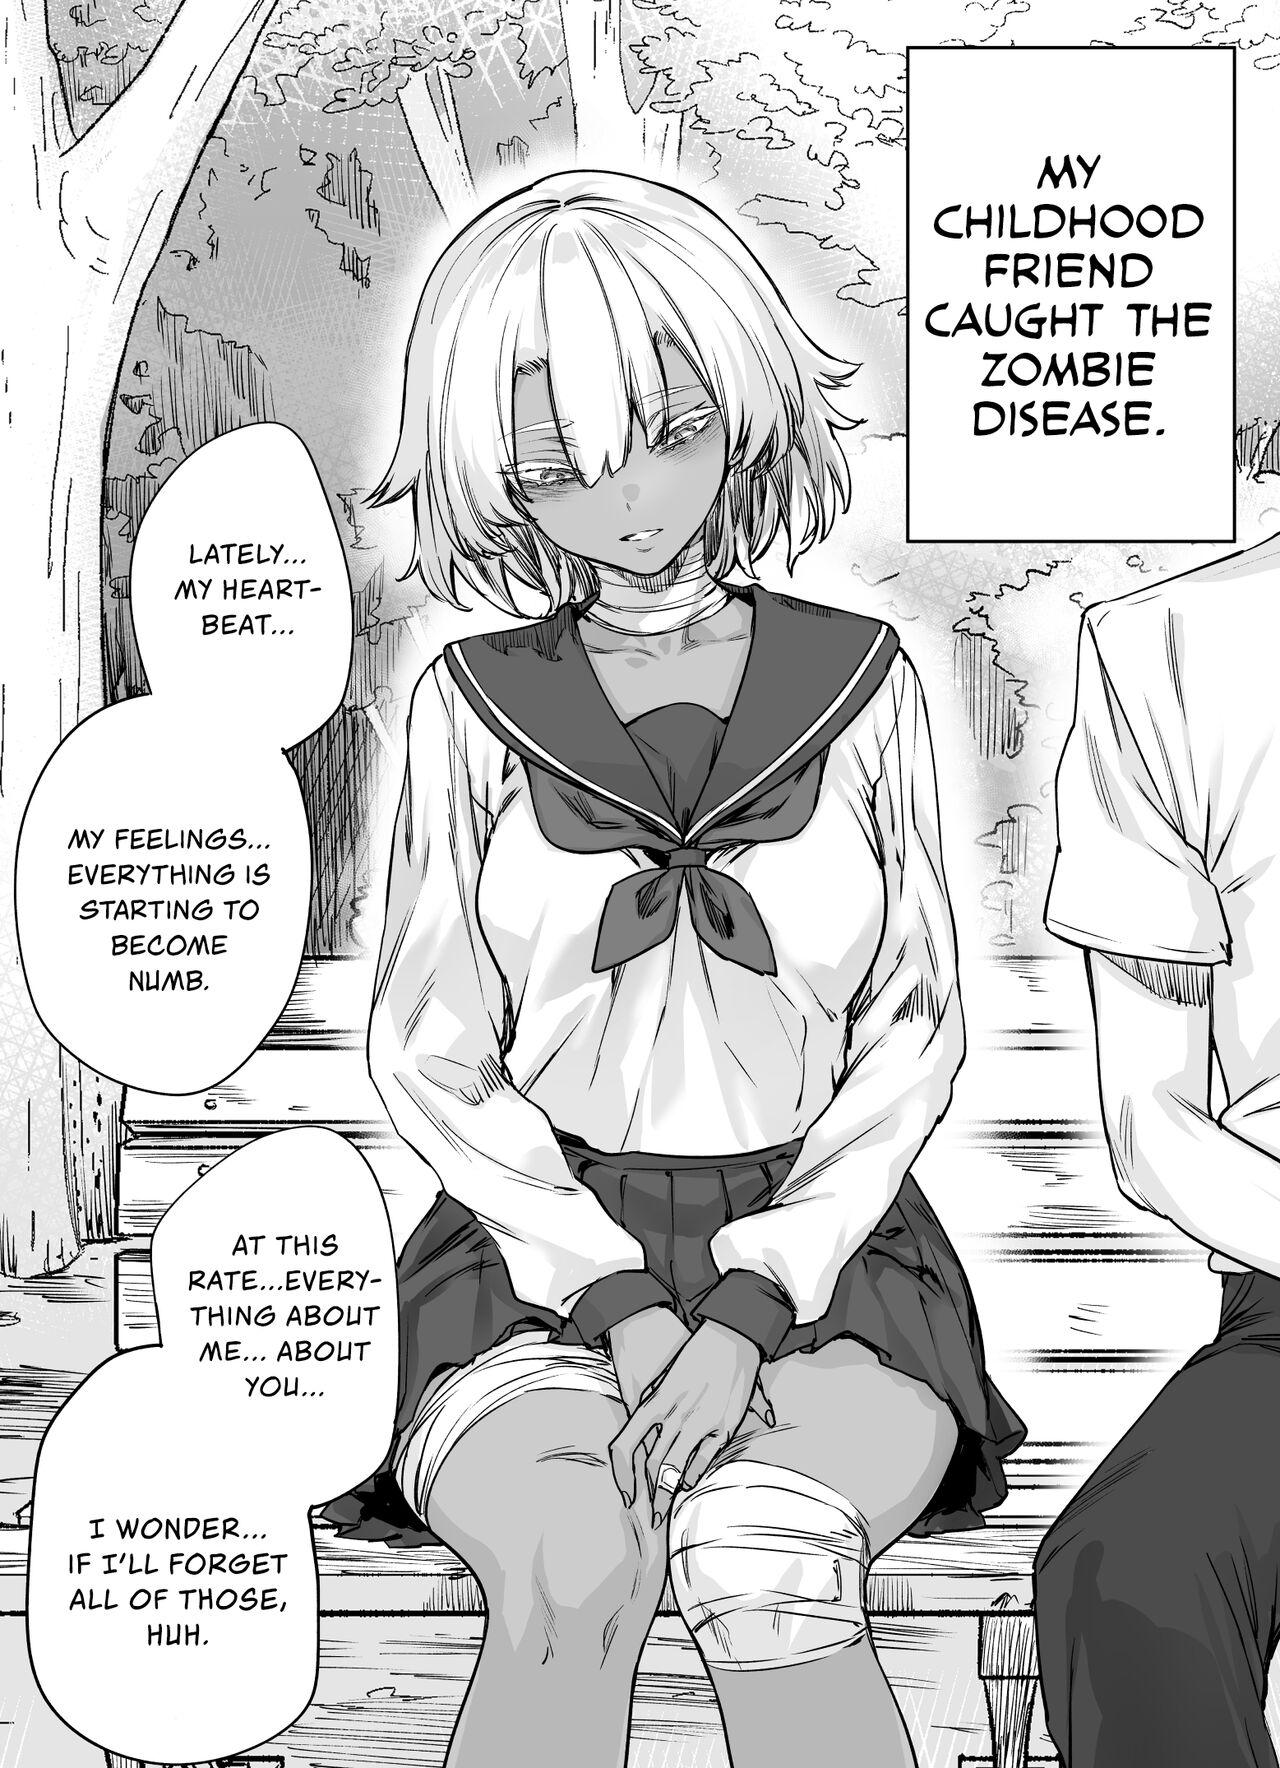 A Manga About Teaching My Zombie Childhood Friend The Real Feeling of Sex 1